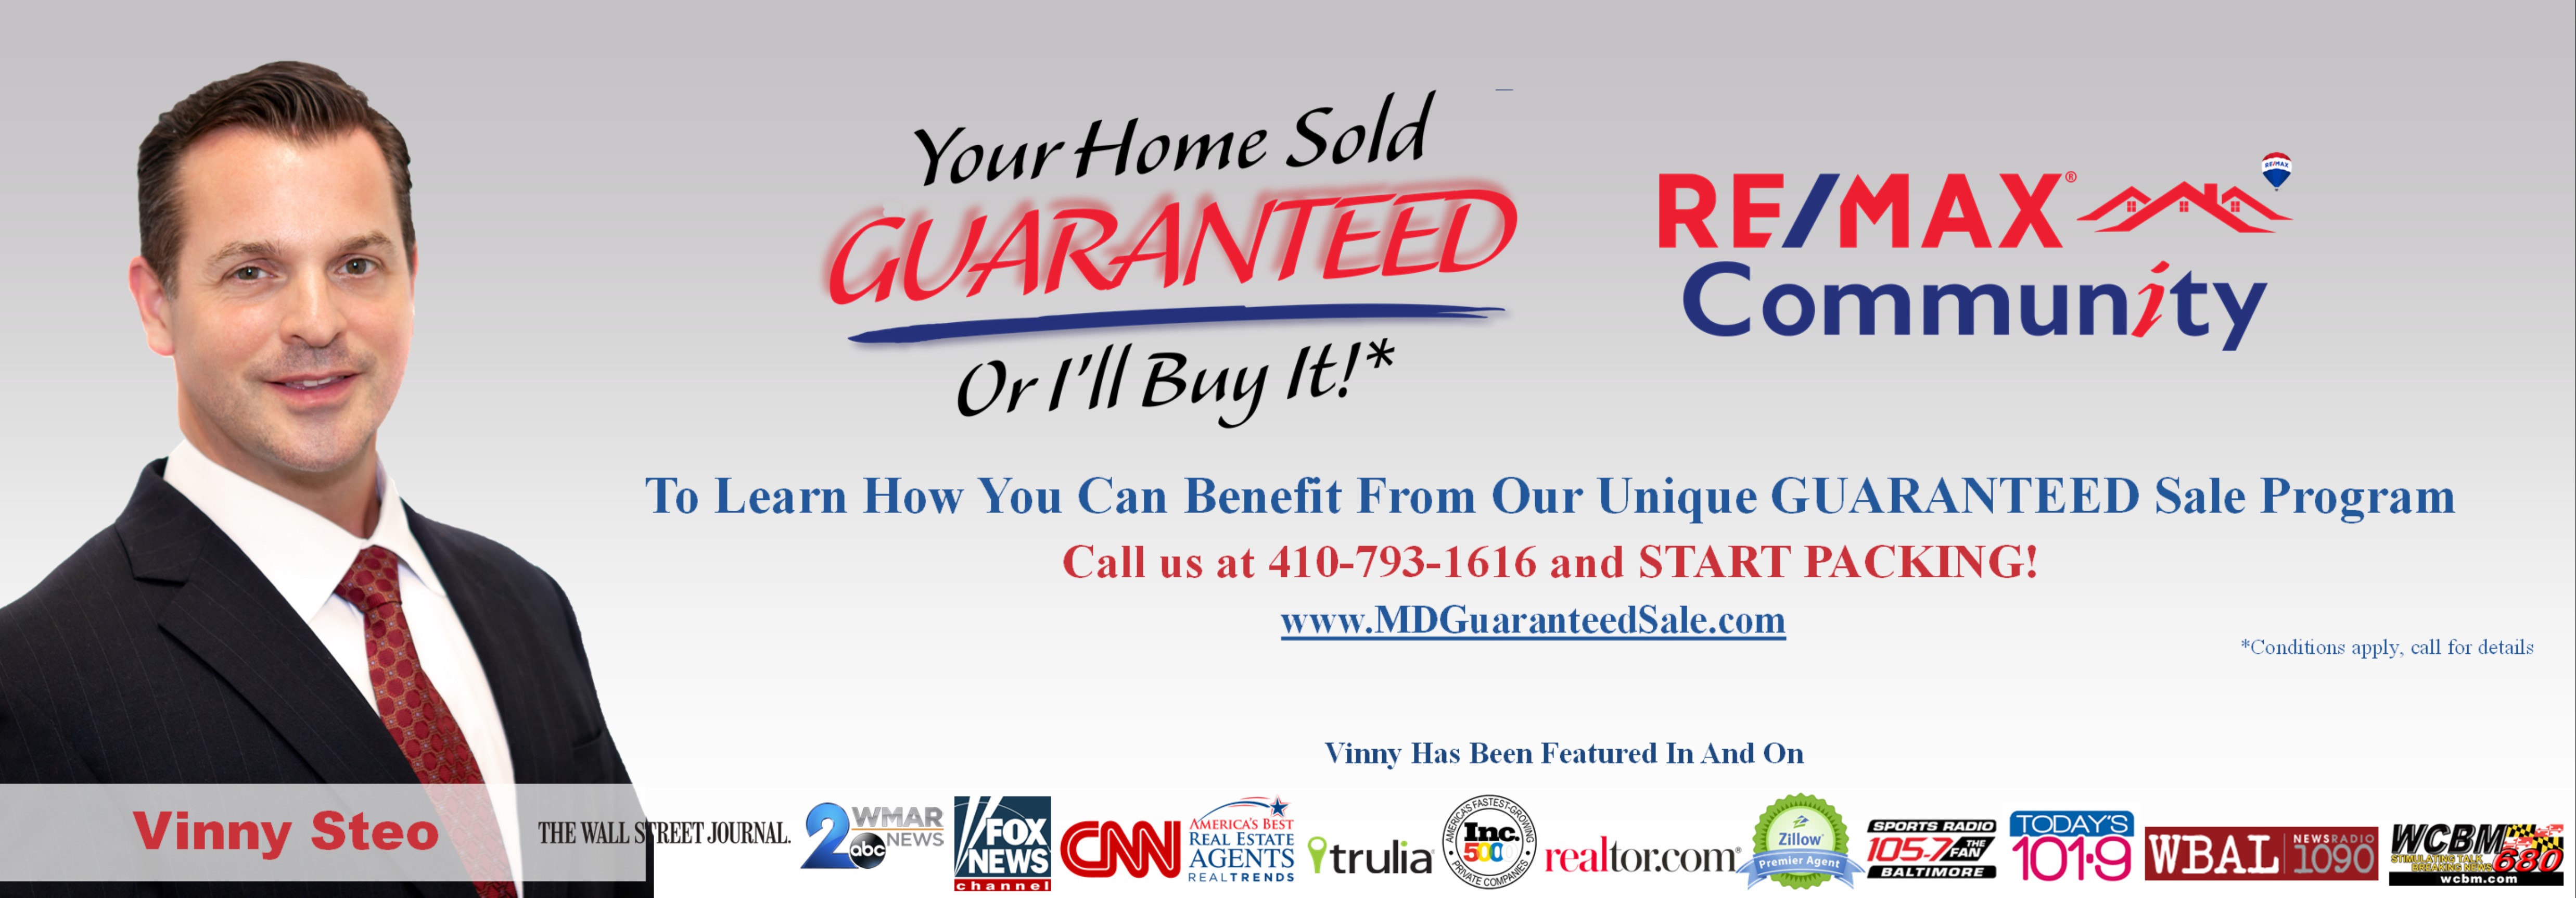 Your Home Sold Guaranteed or I'll Buy It